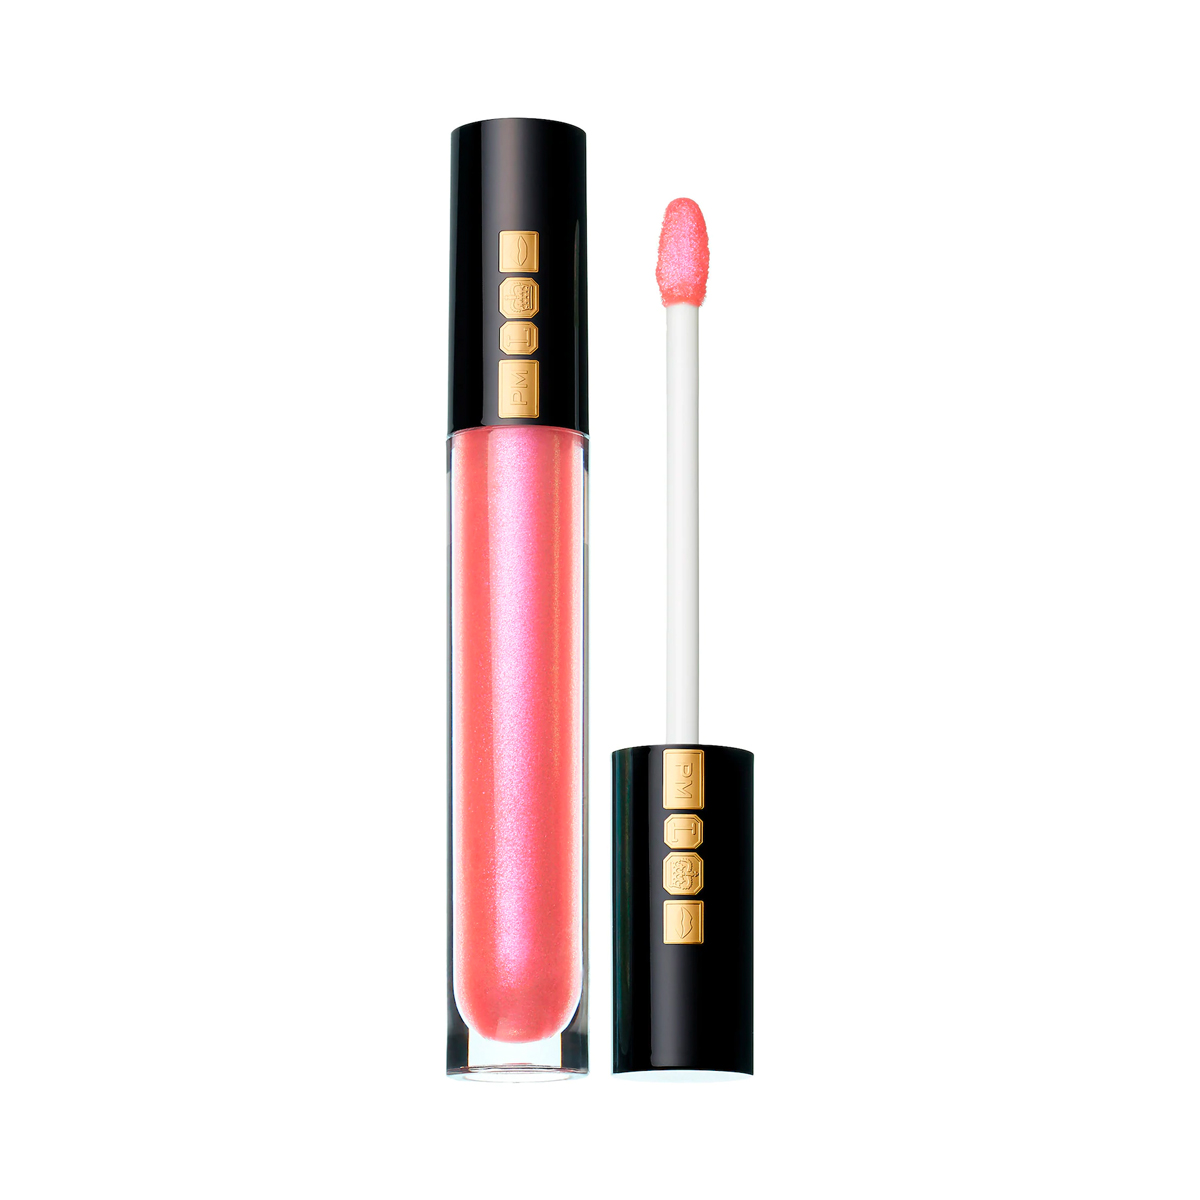 Pat McGrath Labs Lust: Lip Gloss in Pale Fire Nectar